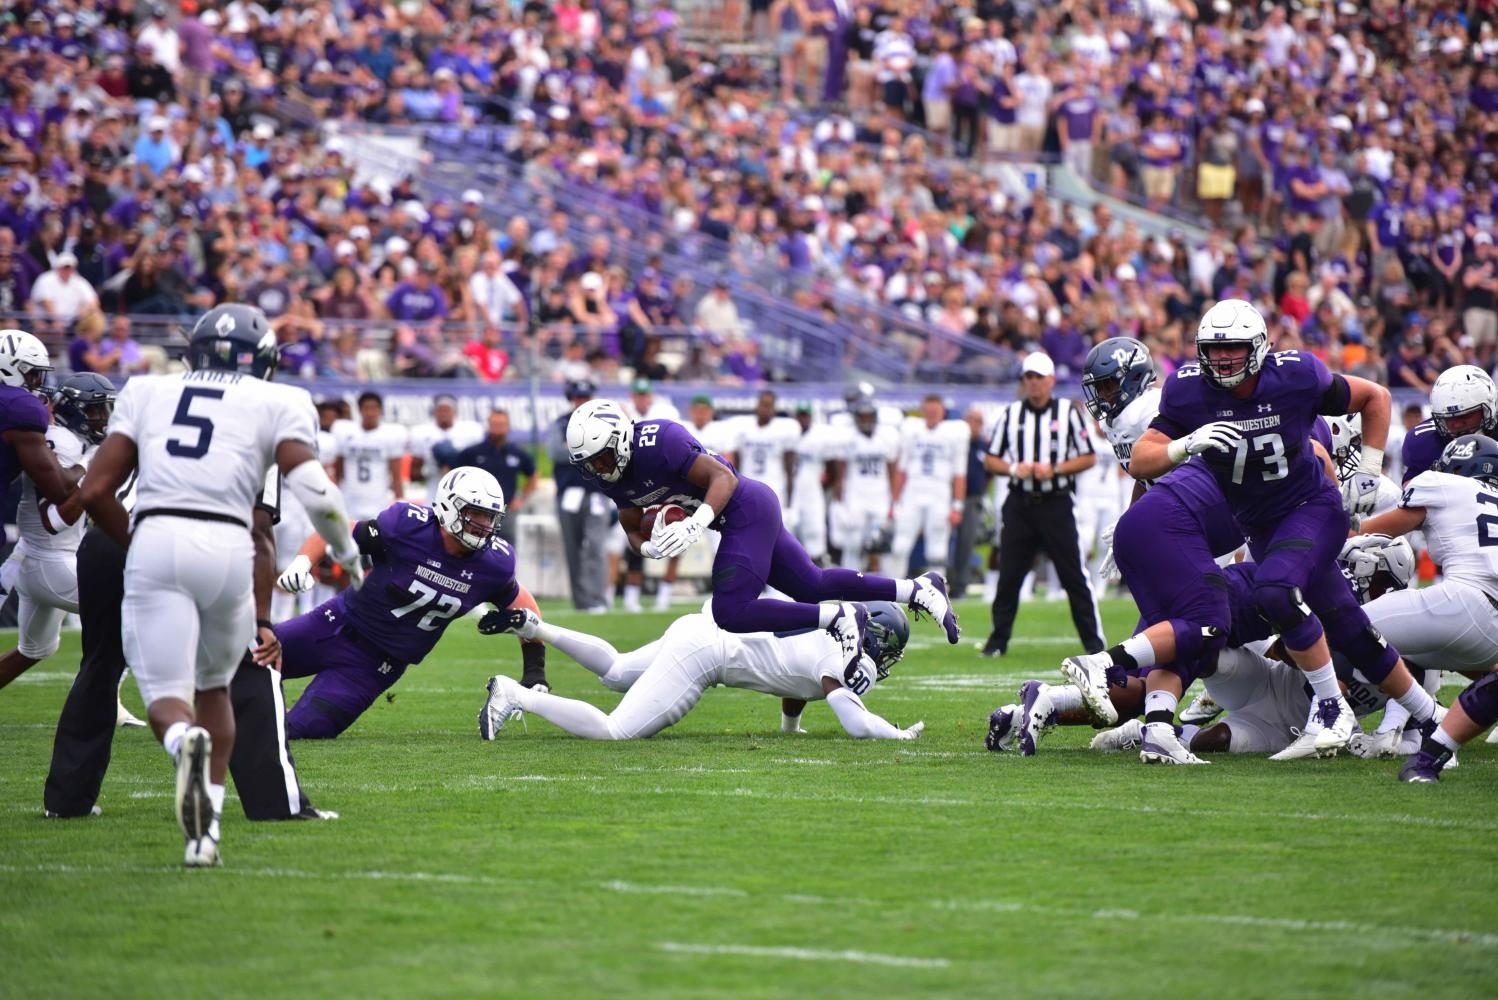 Jeremy Larkin dives forward. The redshirt freshman and the Wildcats pulled out a win against Nevada on Saturday.